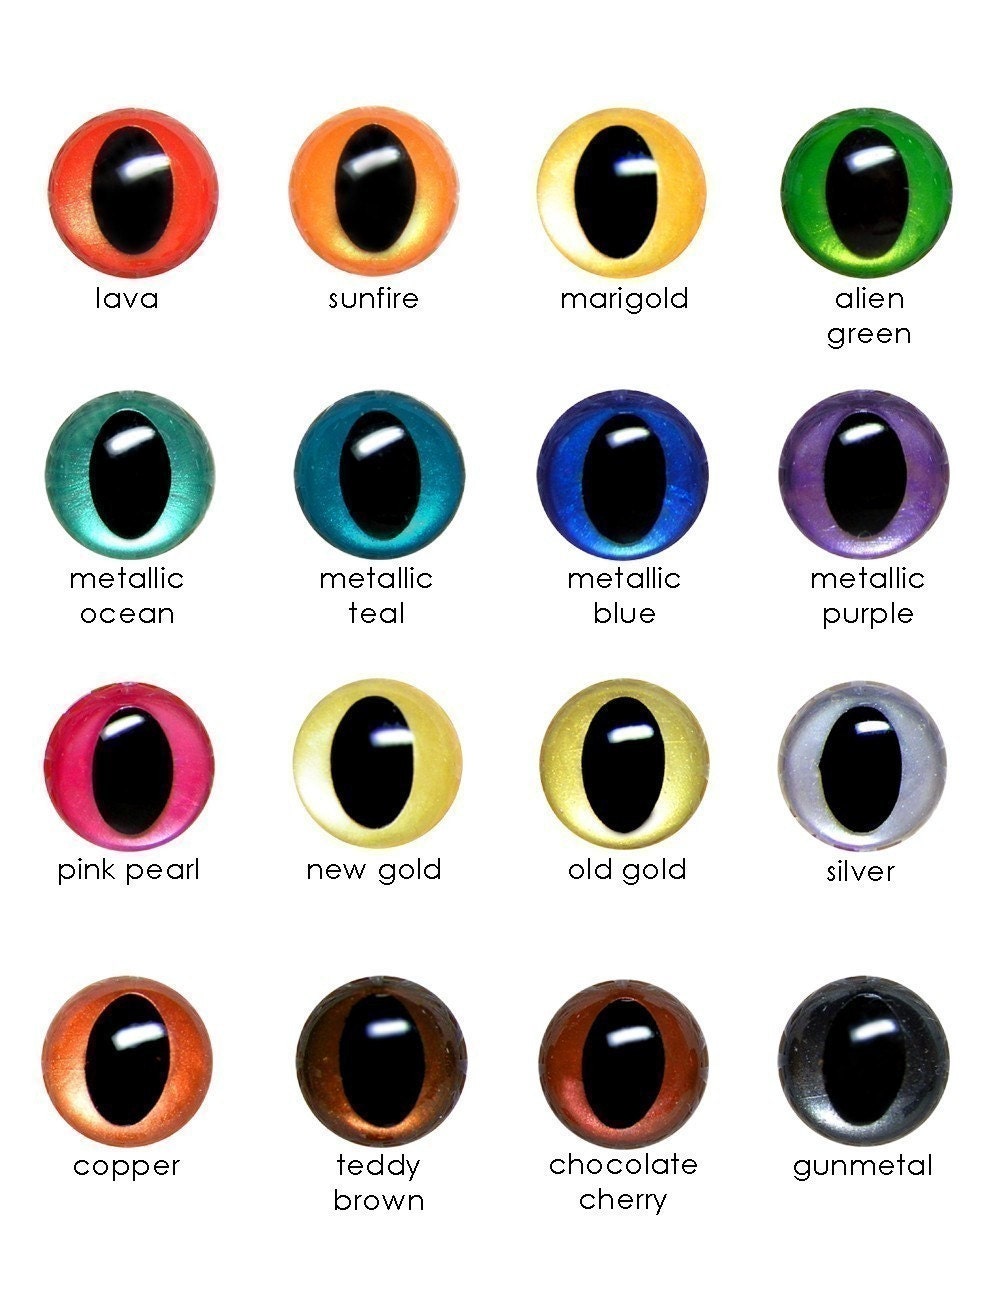 cat eye pupil meaning